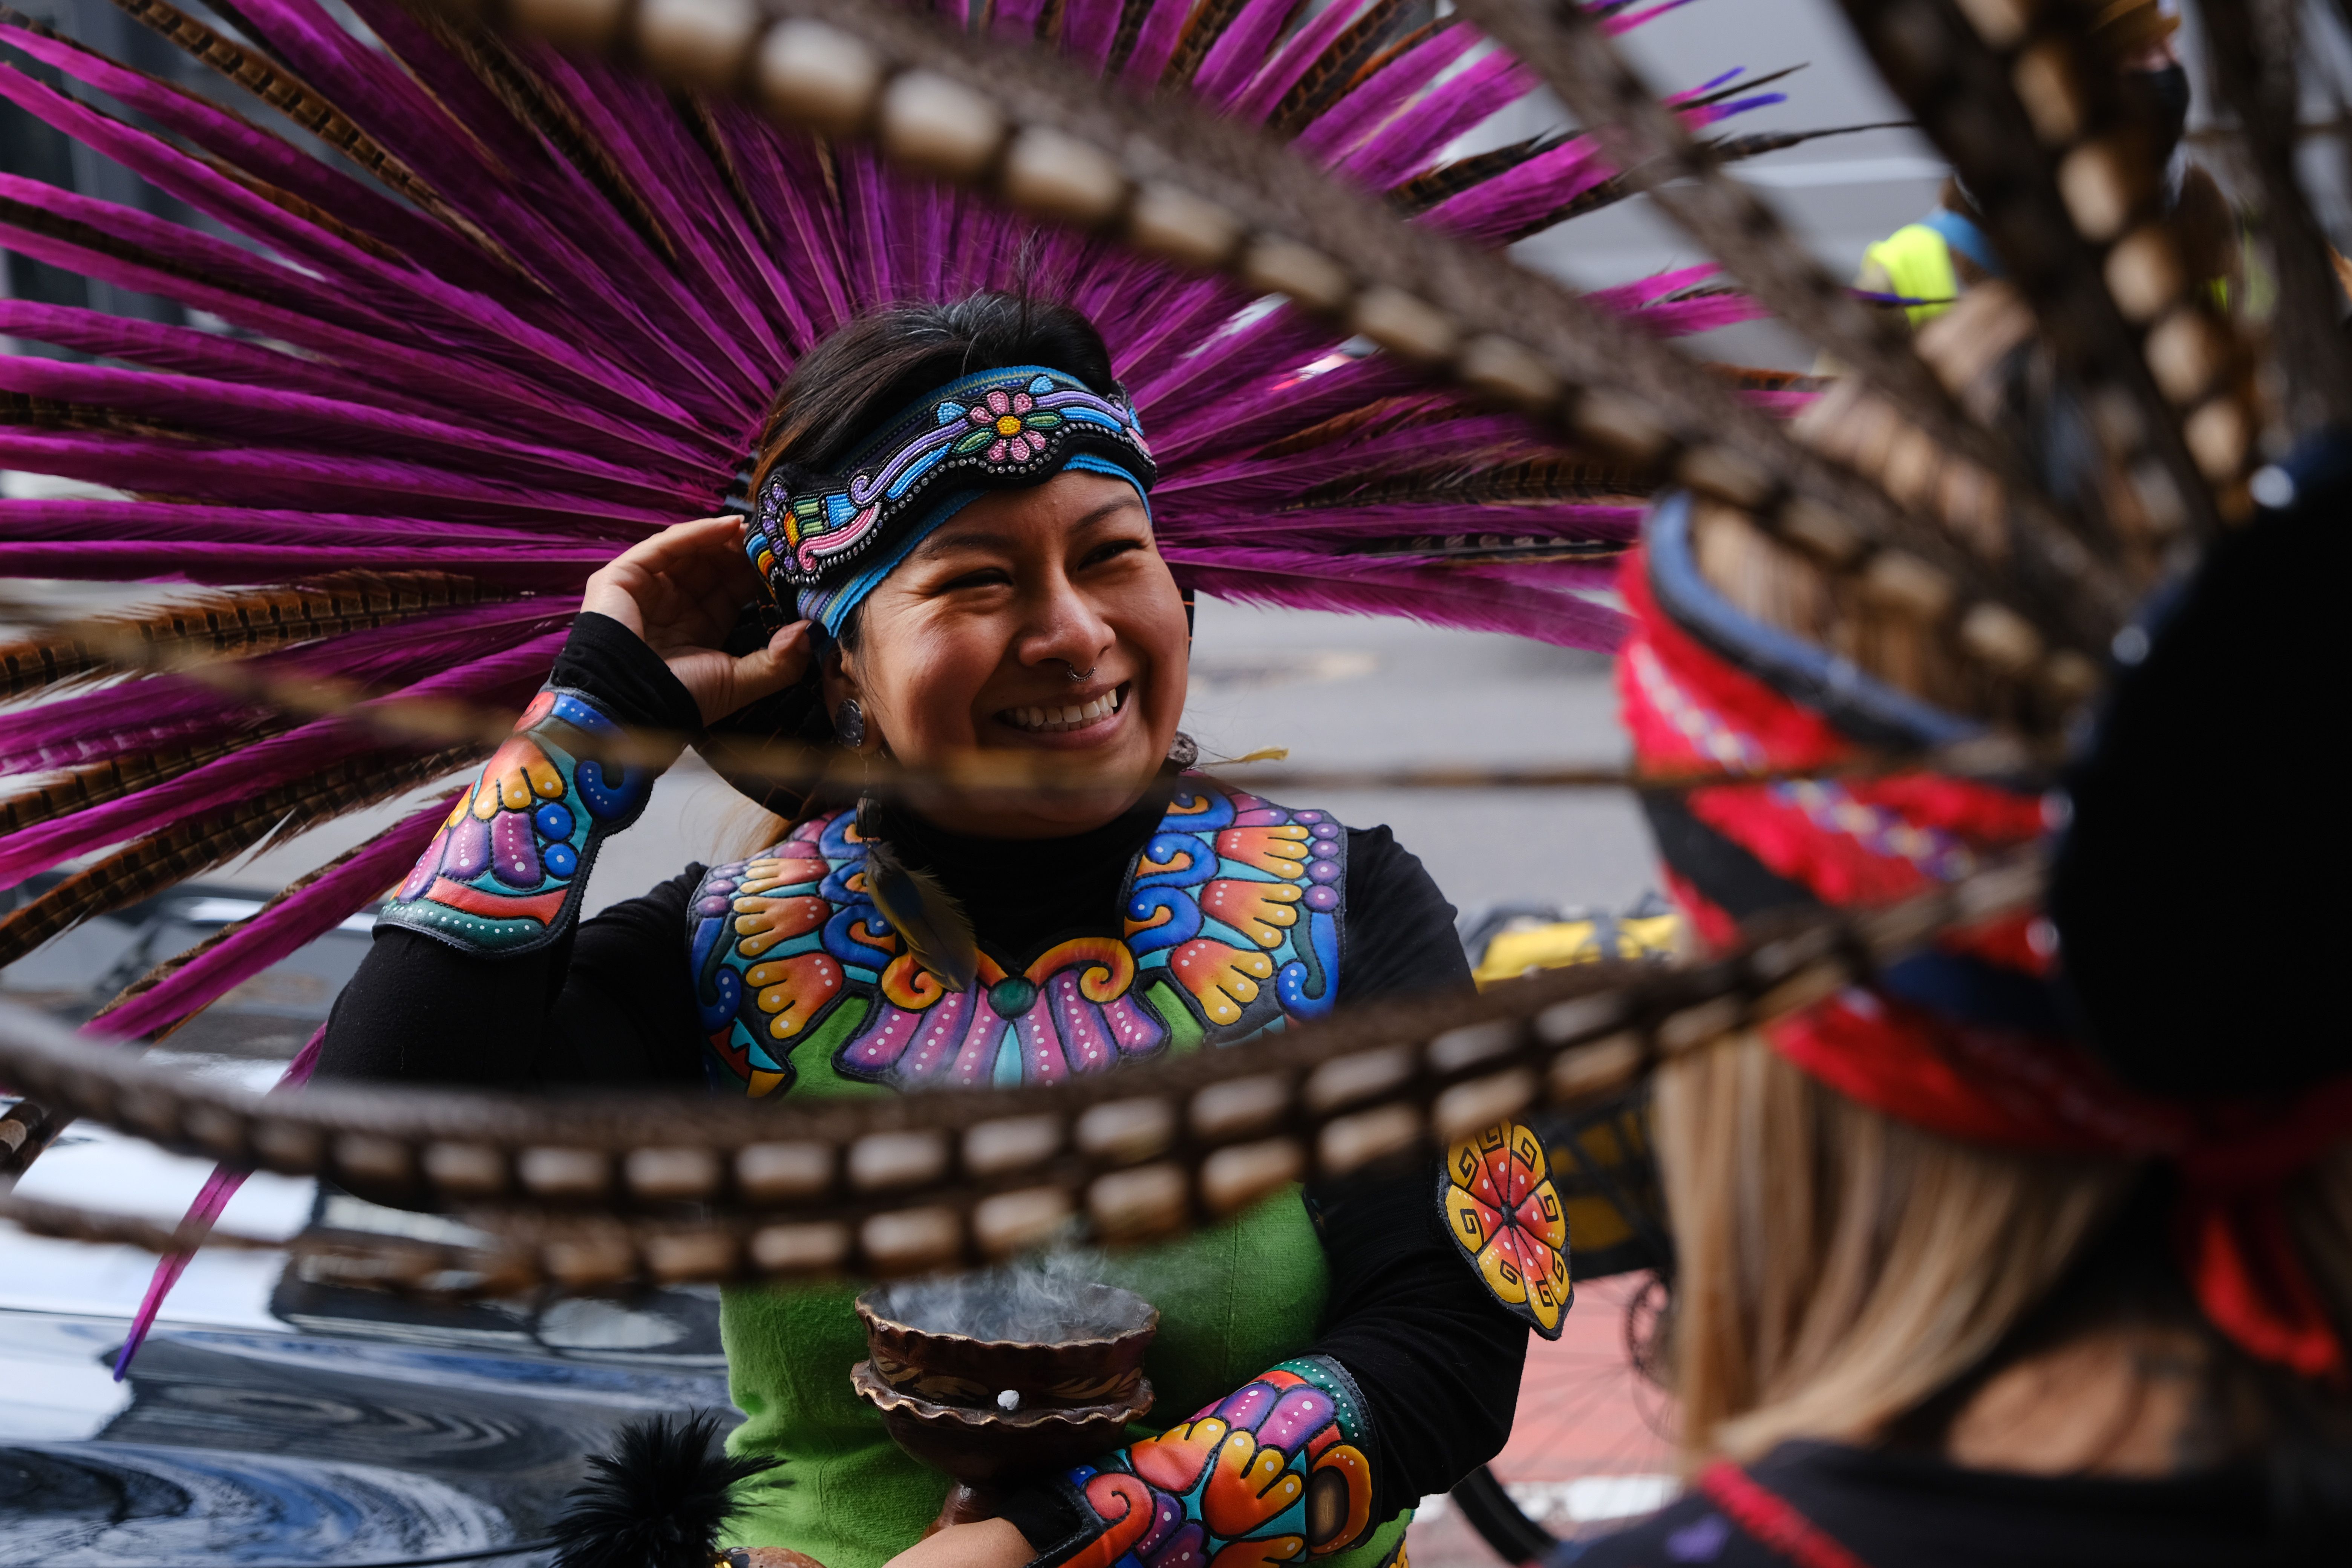 A person smiles while wearing a feathered headdress.